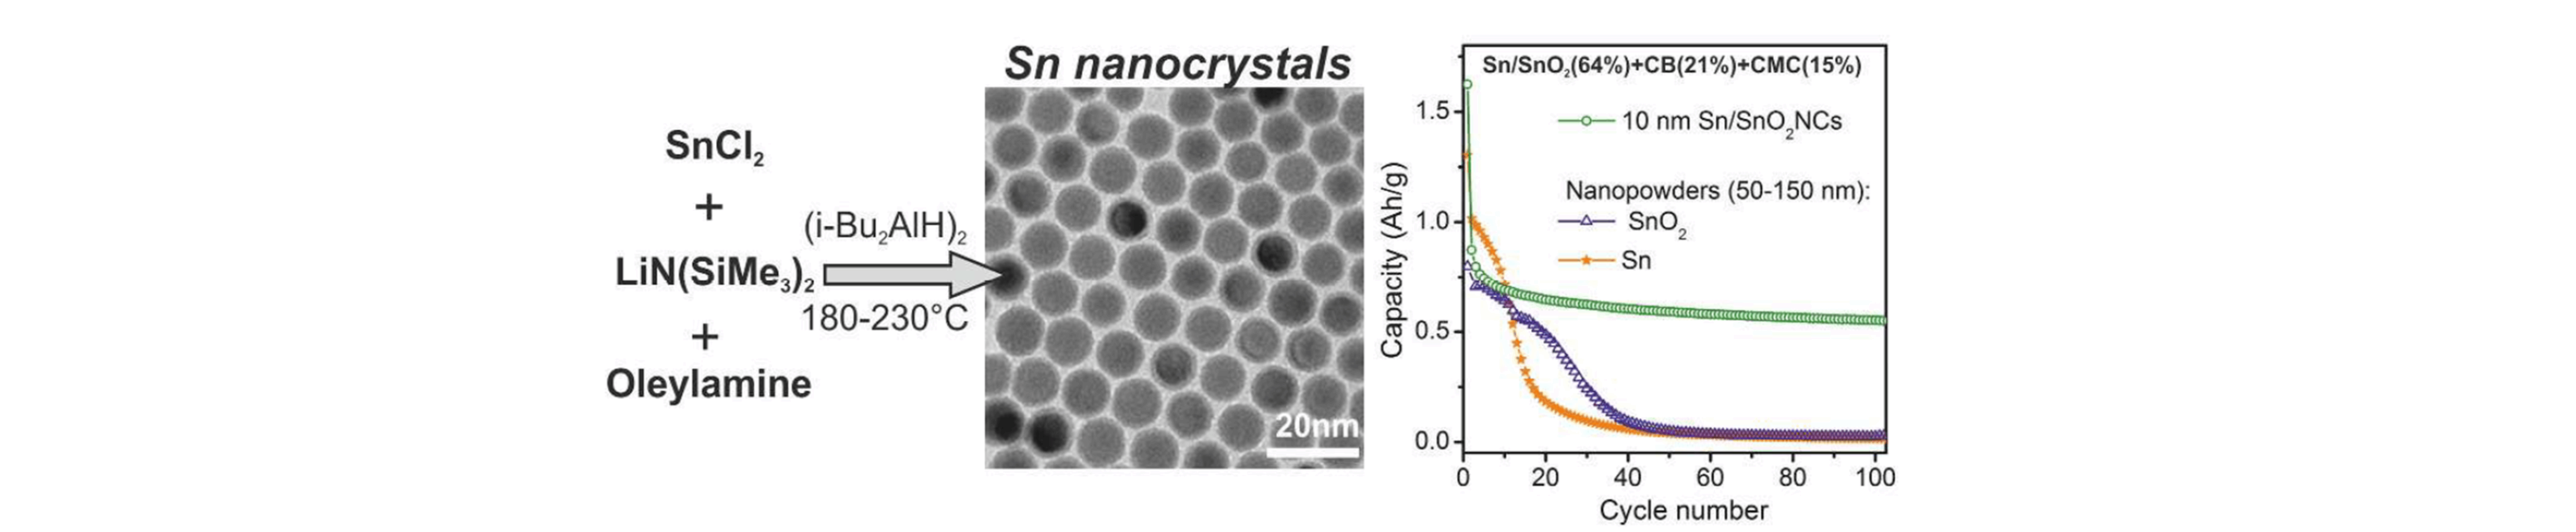 Monodisperse and Inorganically Capped Sn and Sn/SnO2 Nanocrystals for High Performance Li-Ion Battery Anodes